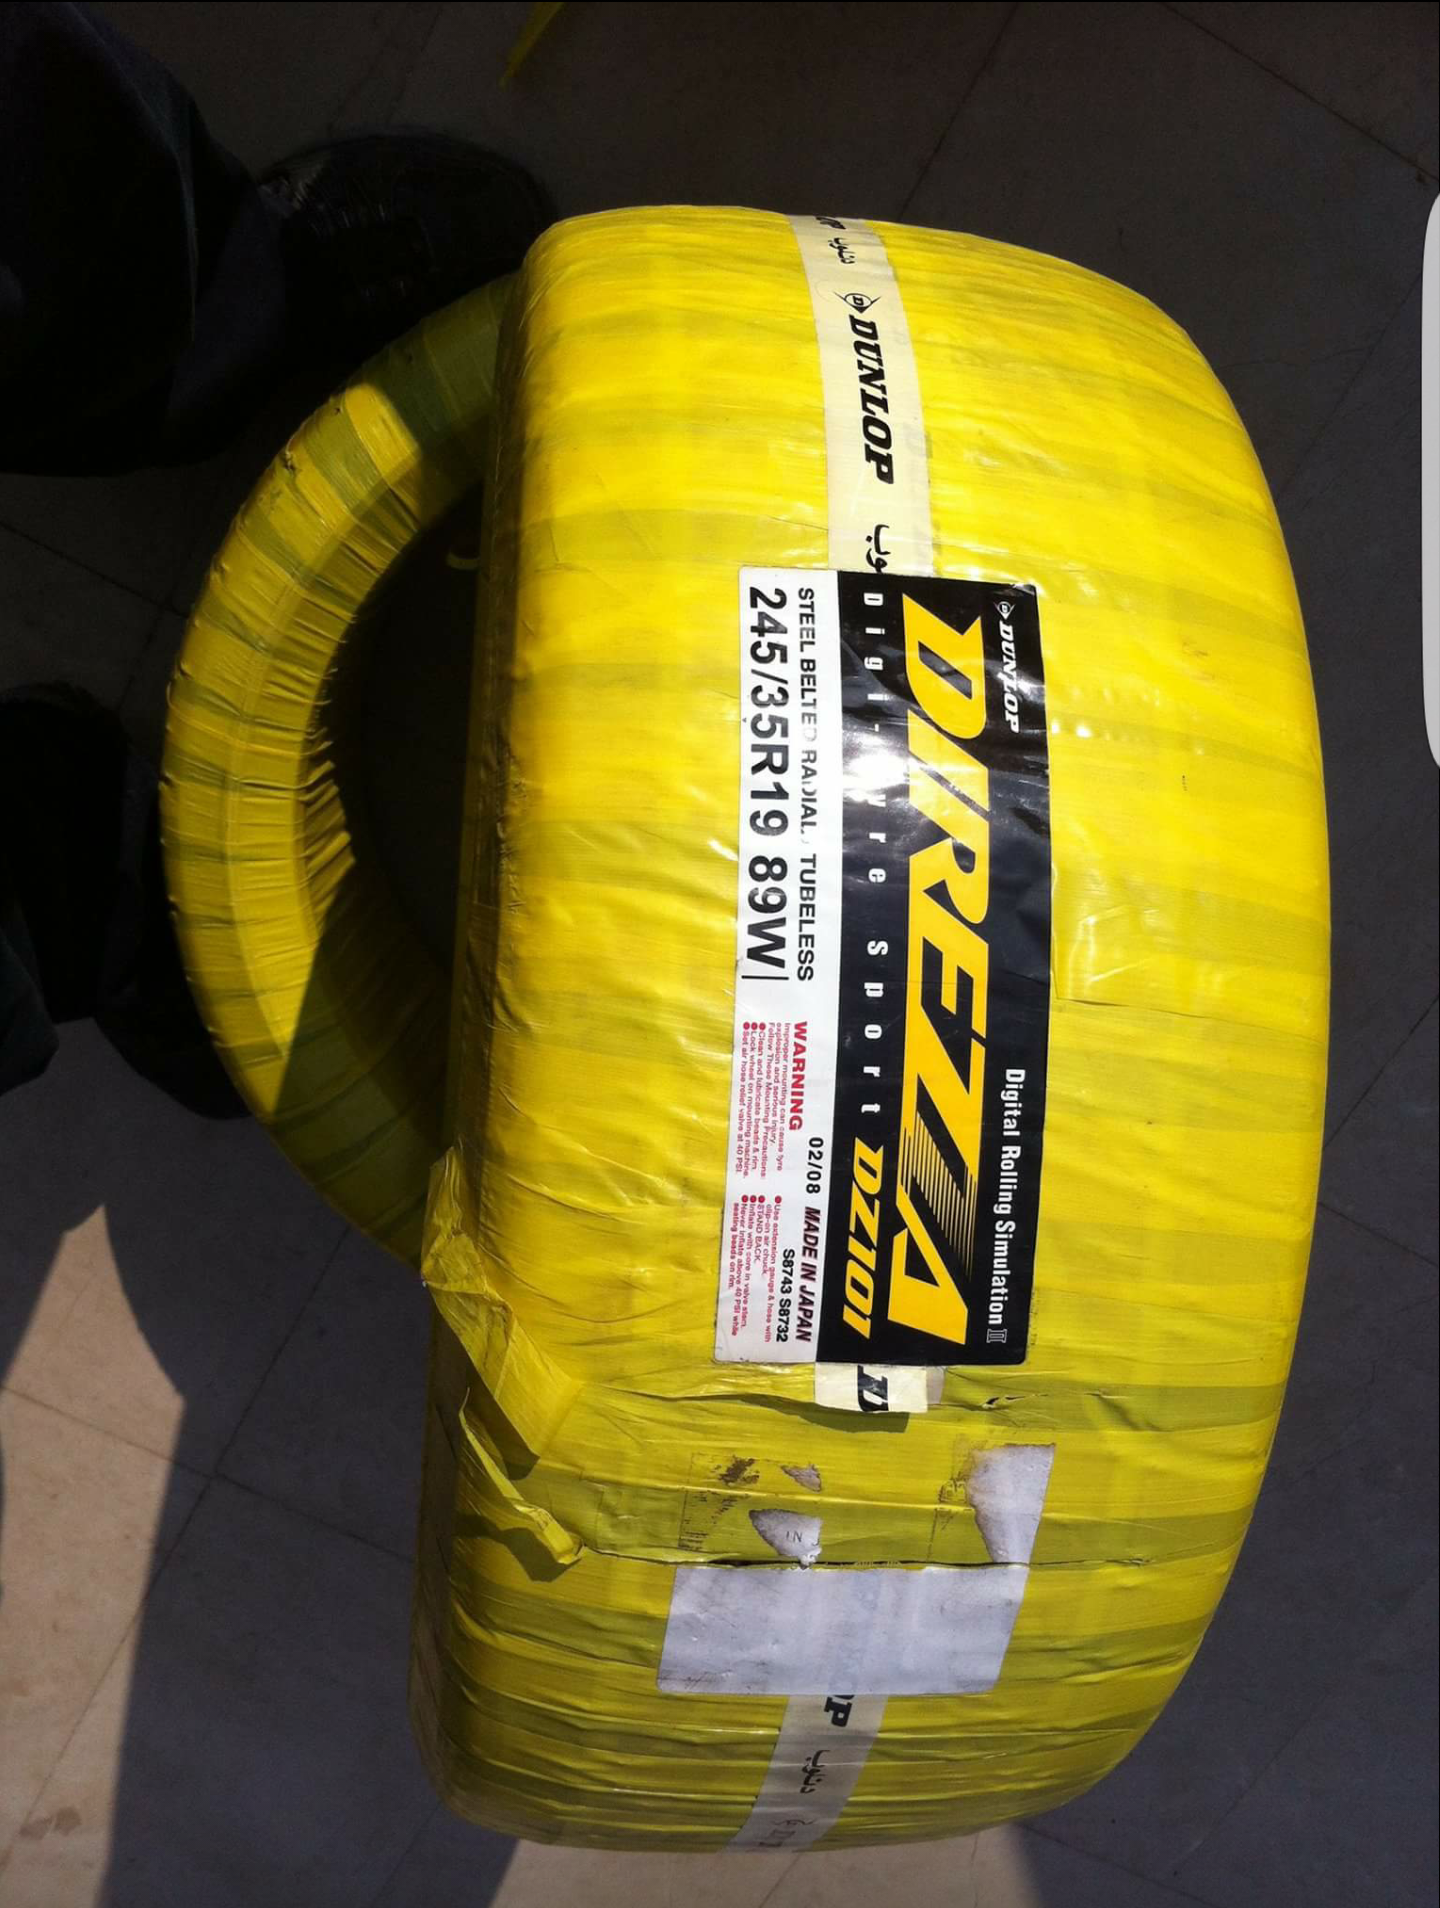 19 inch rays rims and tyres for sale - Buy, Sell & Exchange - PakWheels ...